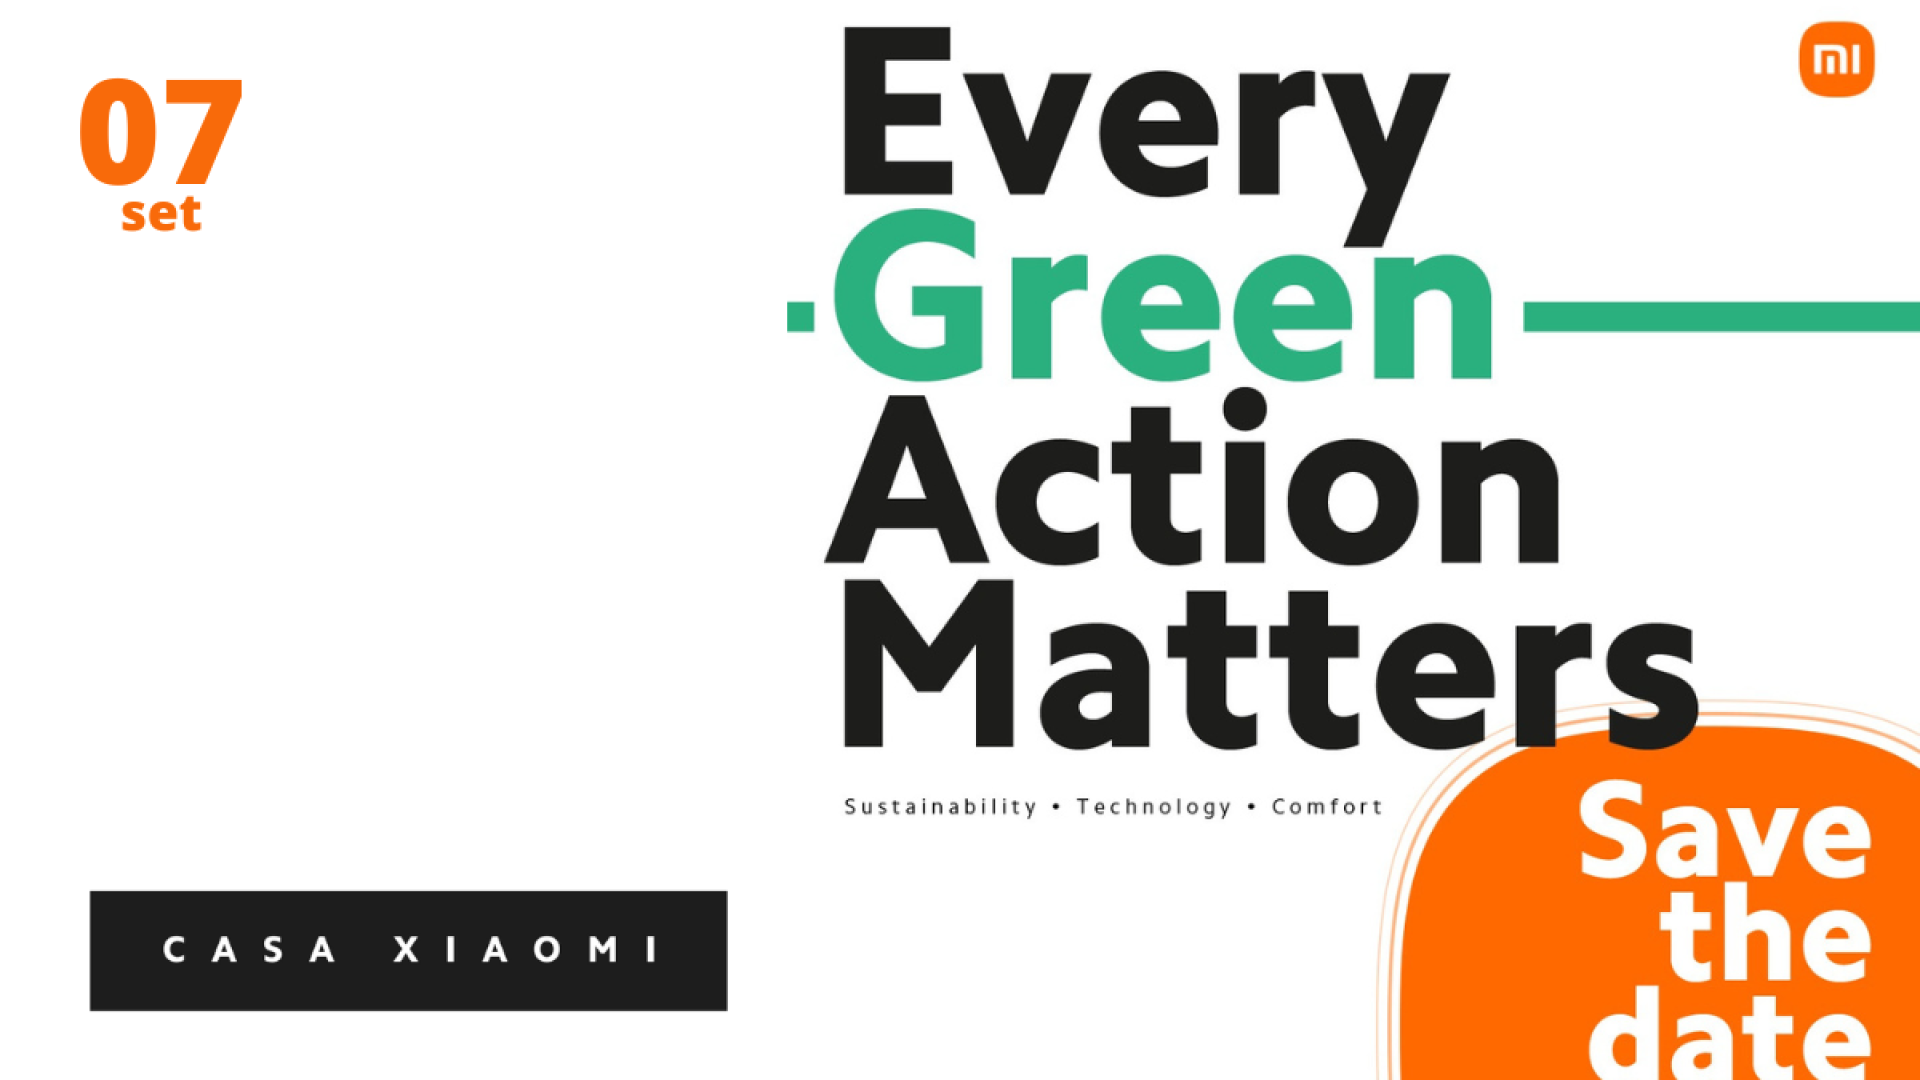 Casa Xiaomi ospita la roundtable Every Green Action Matters